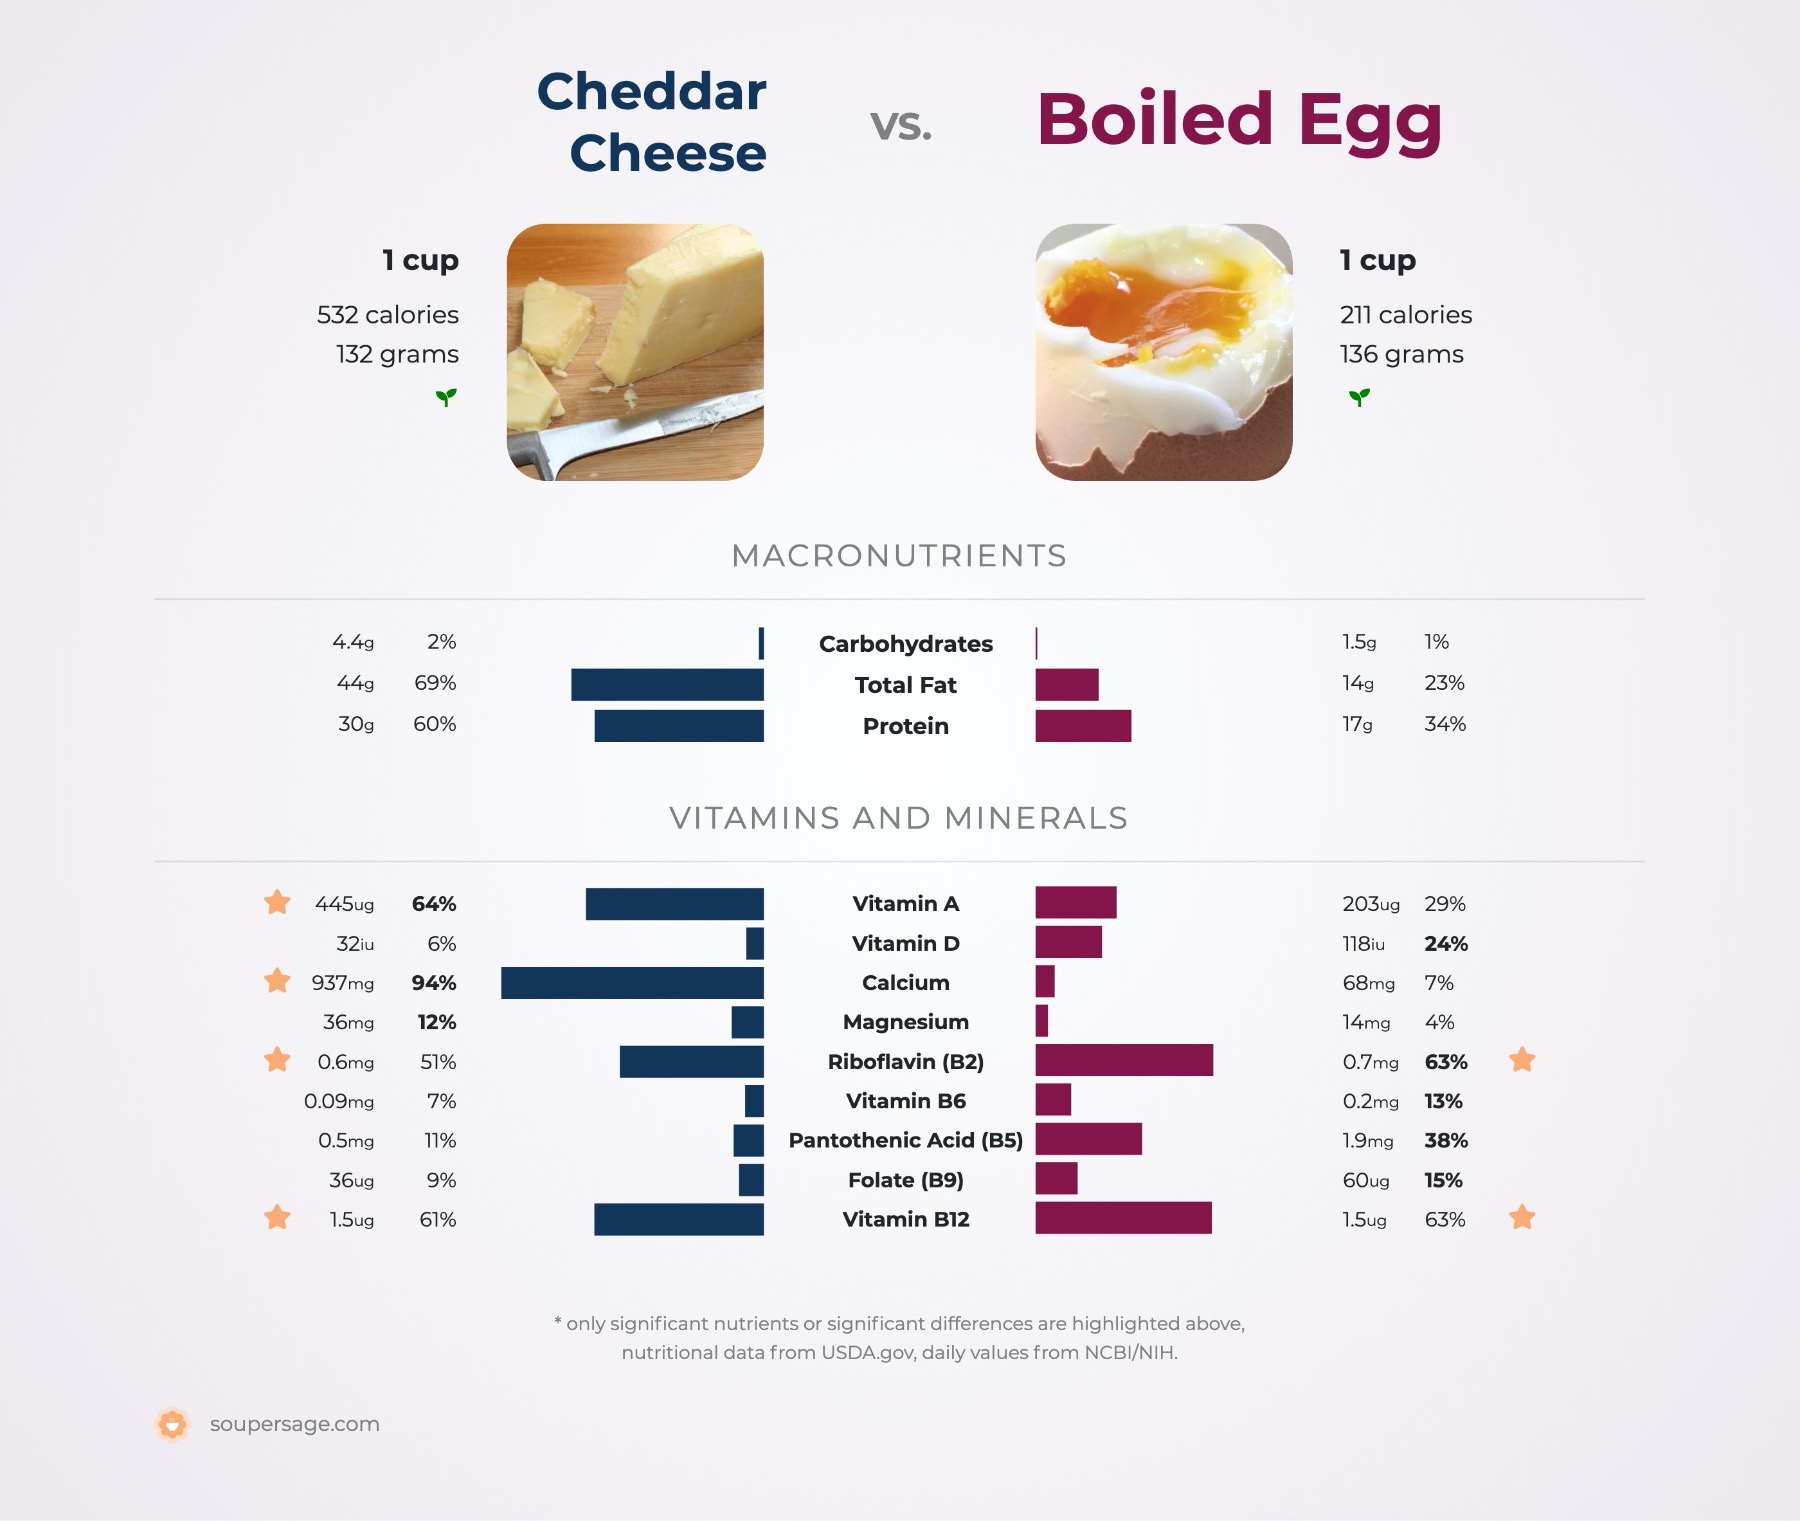 nutrition comparison of boiled egg vs. cheddar cheese